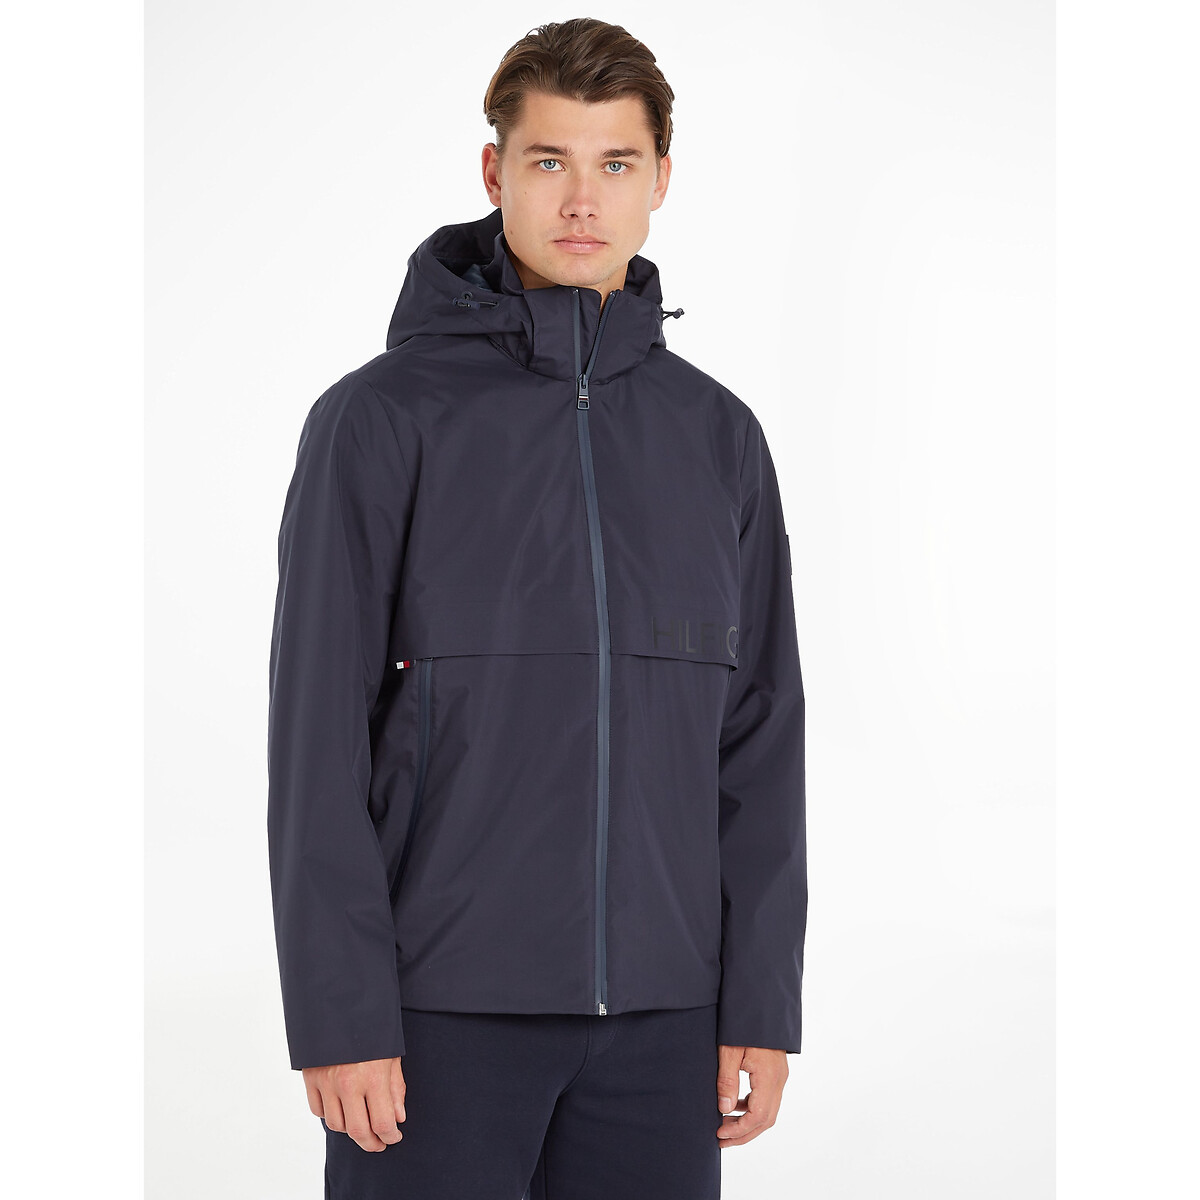 Image of Short Hooded Jacket with High Neck, Mid-Season